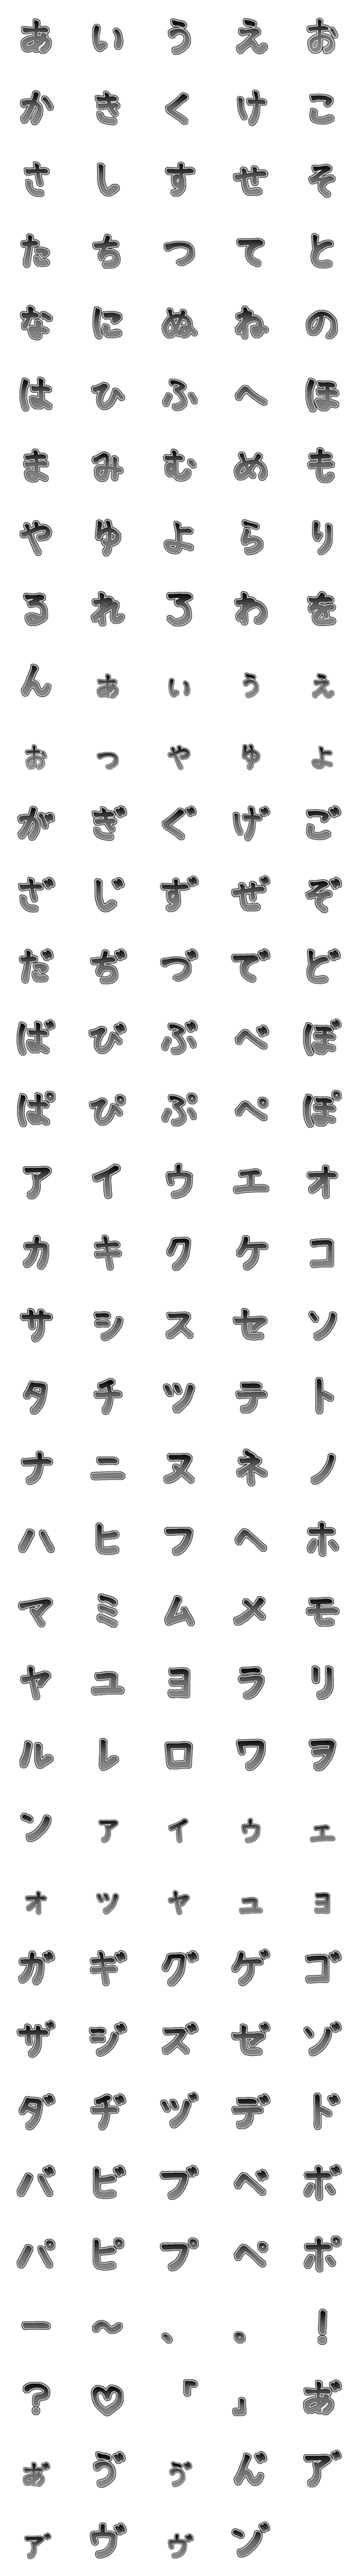 [LINE絵文字]モノクログラデーション文字の画像一覧